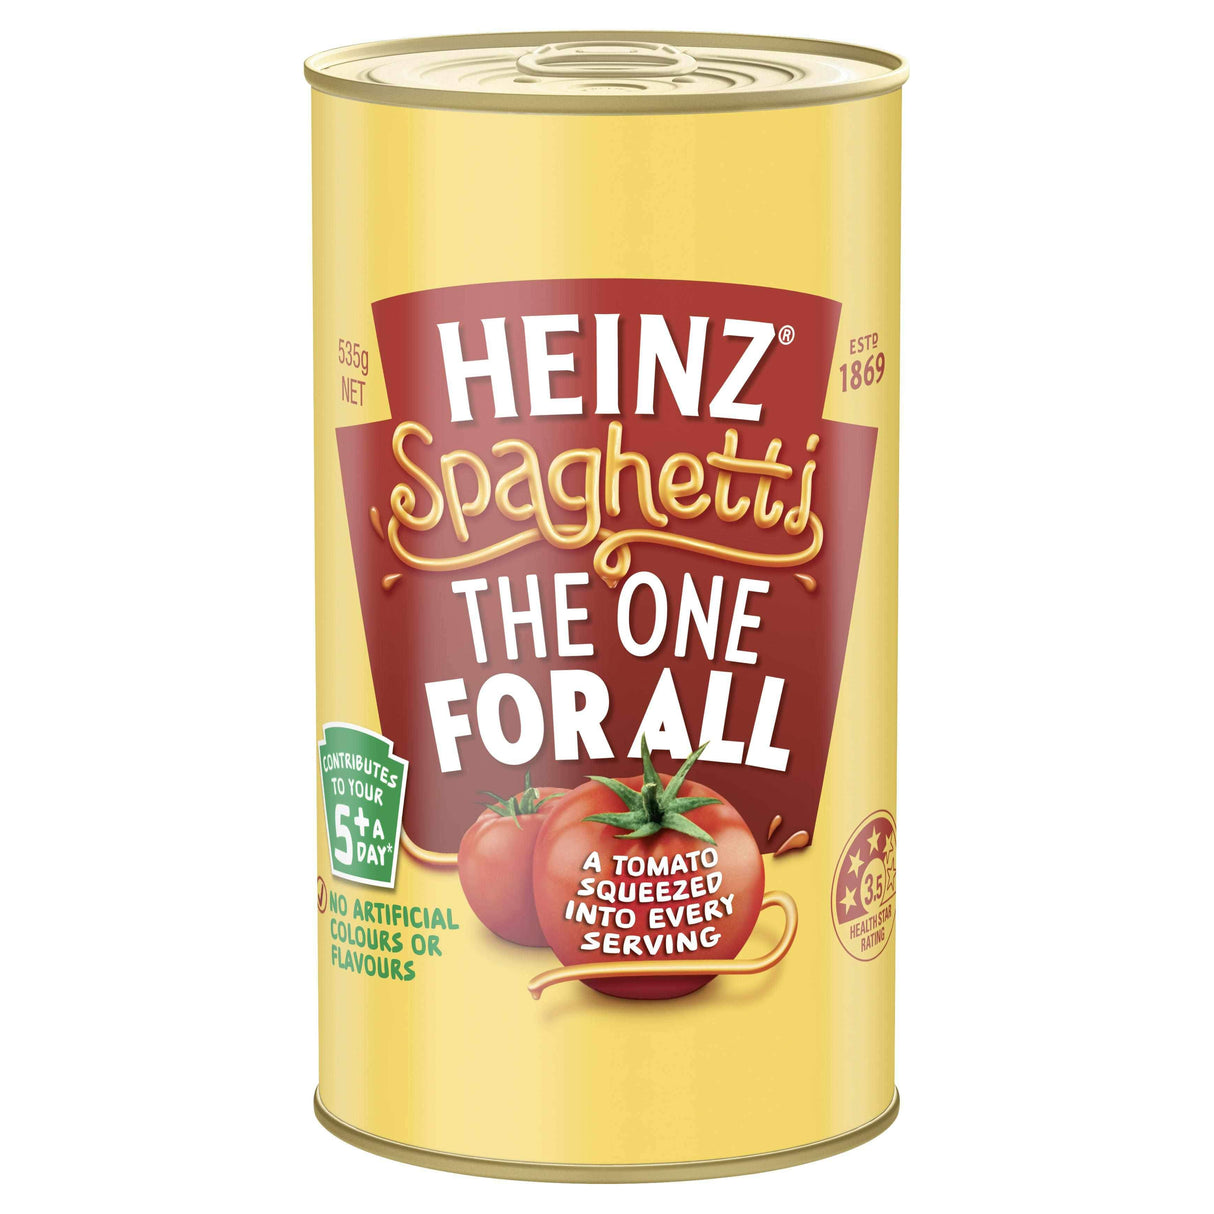 Heinz Spaghetti The One For All 535g